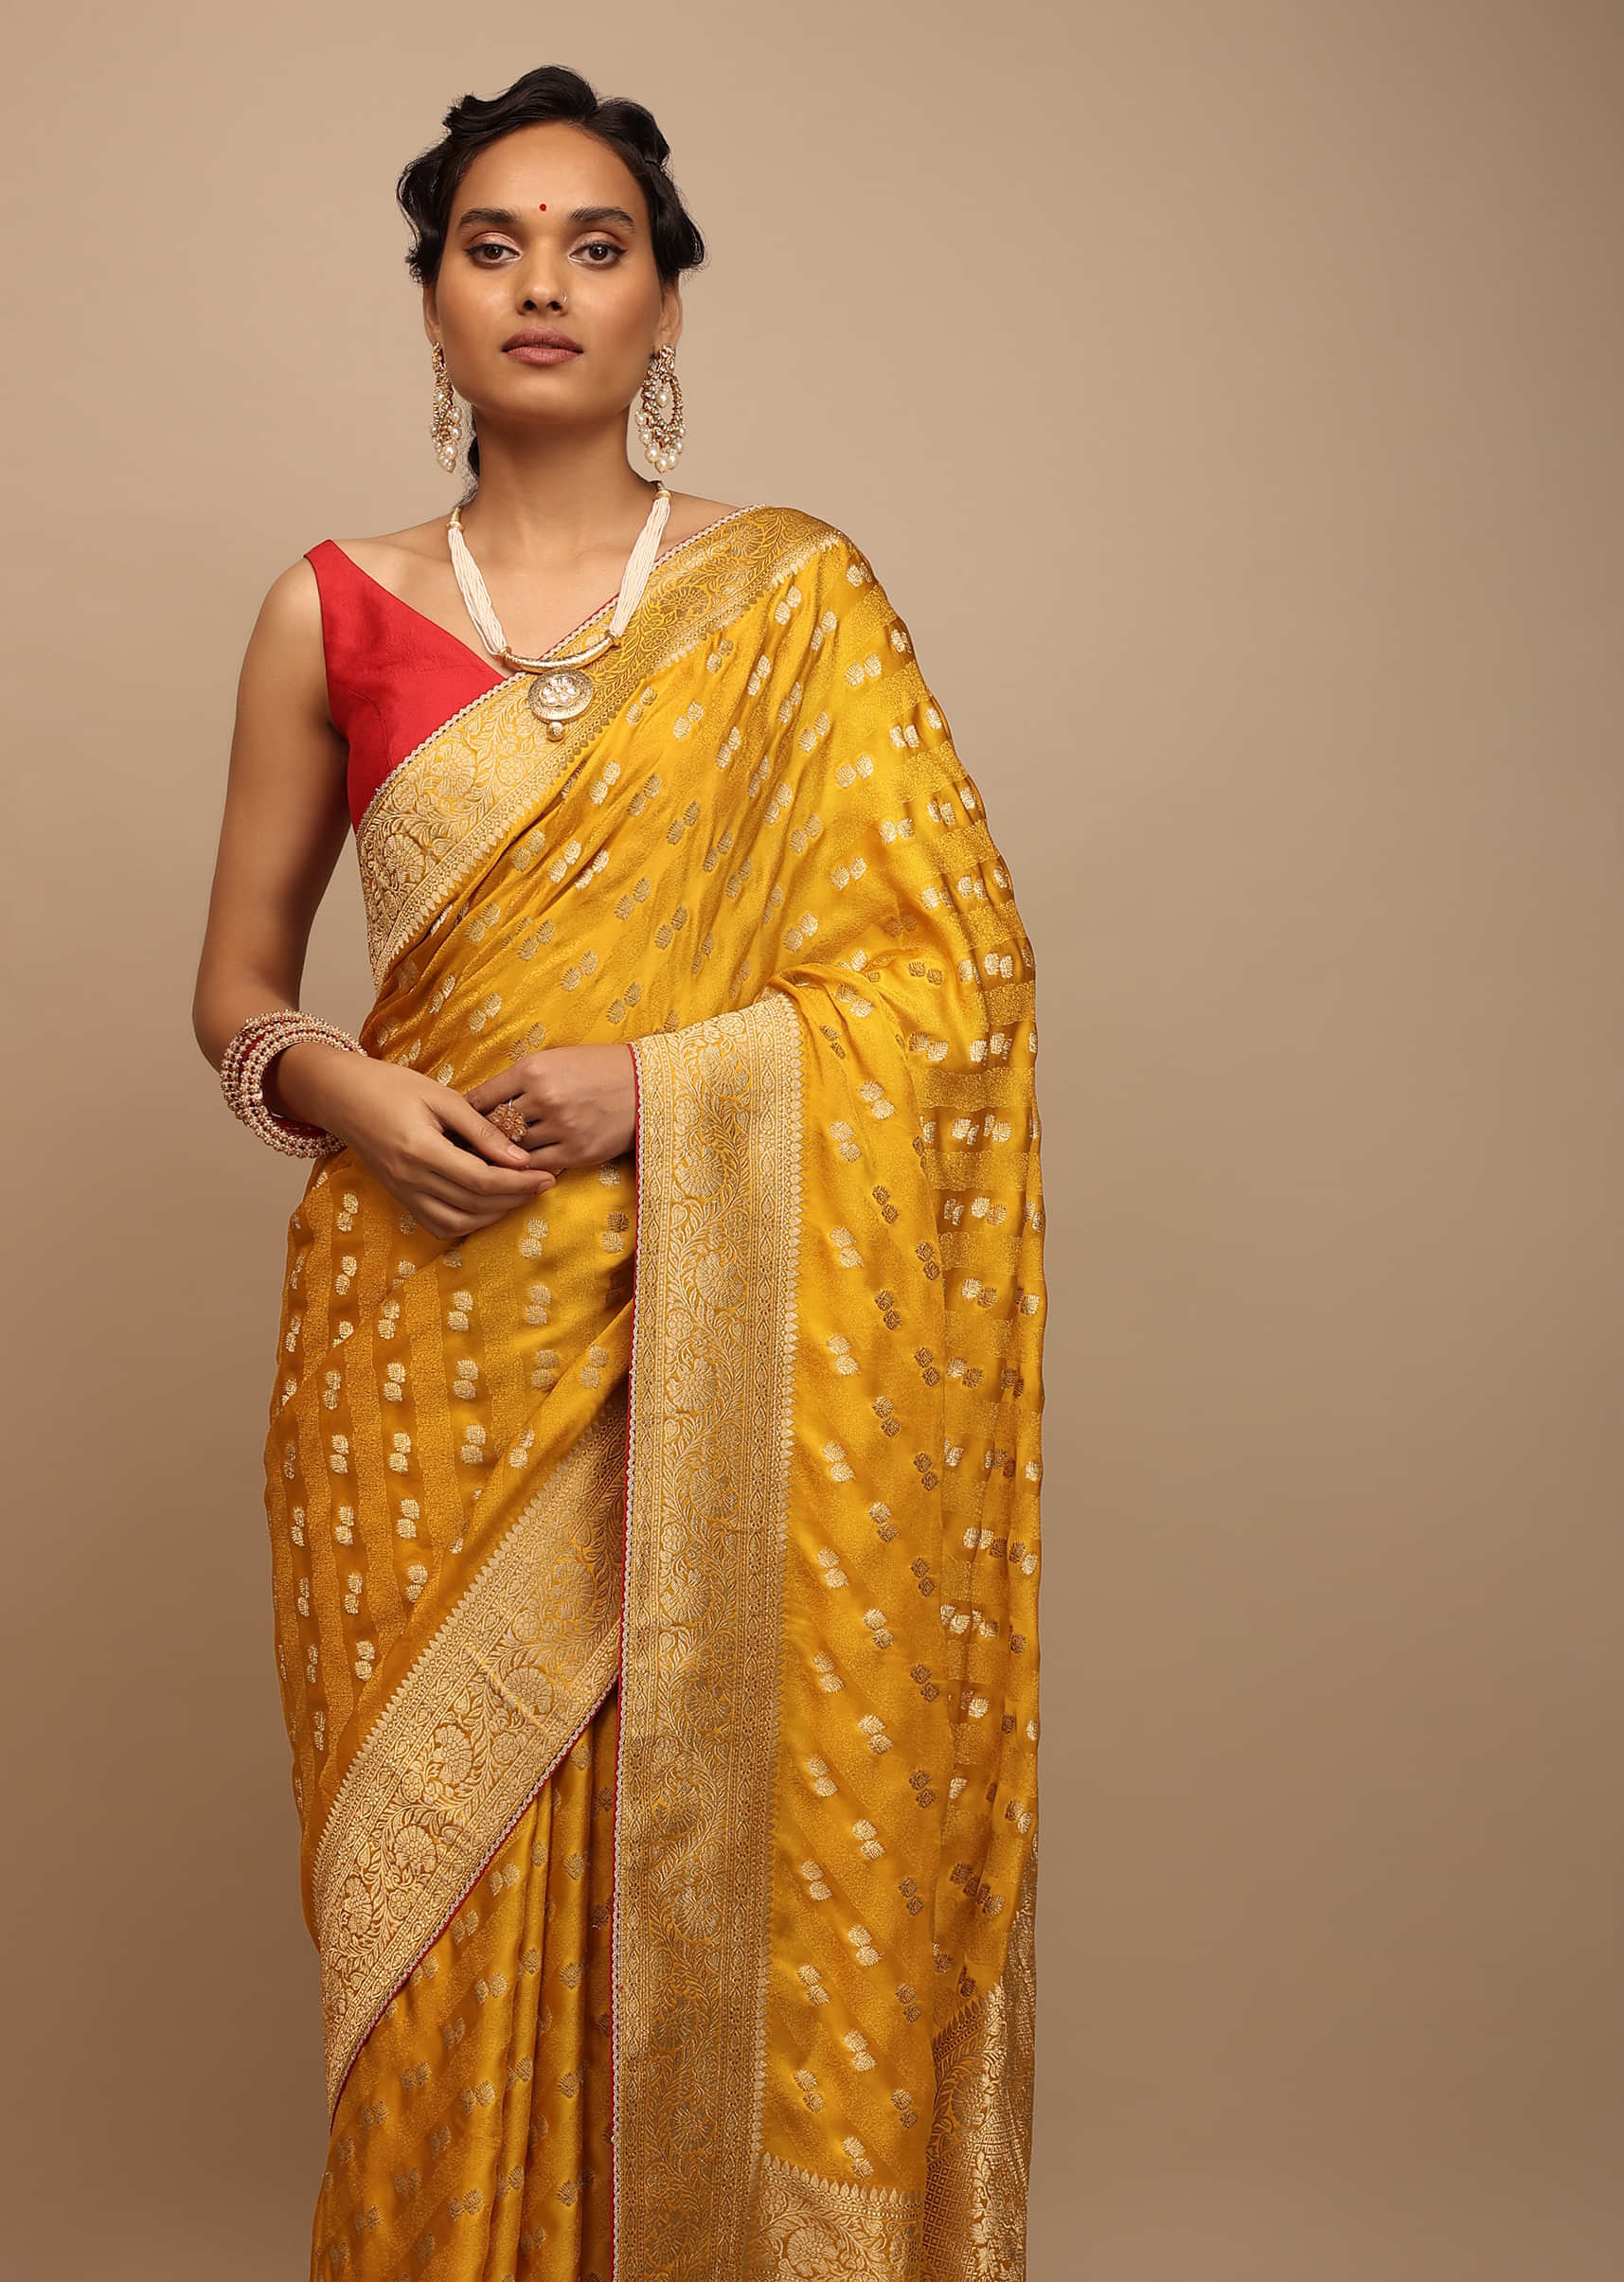 Amber Yellow Saree In Satin With Woven Golden Buttis And Floral Pallu Design